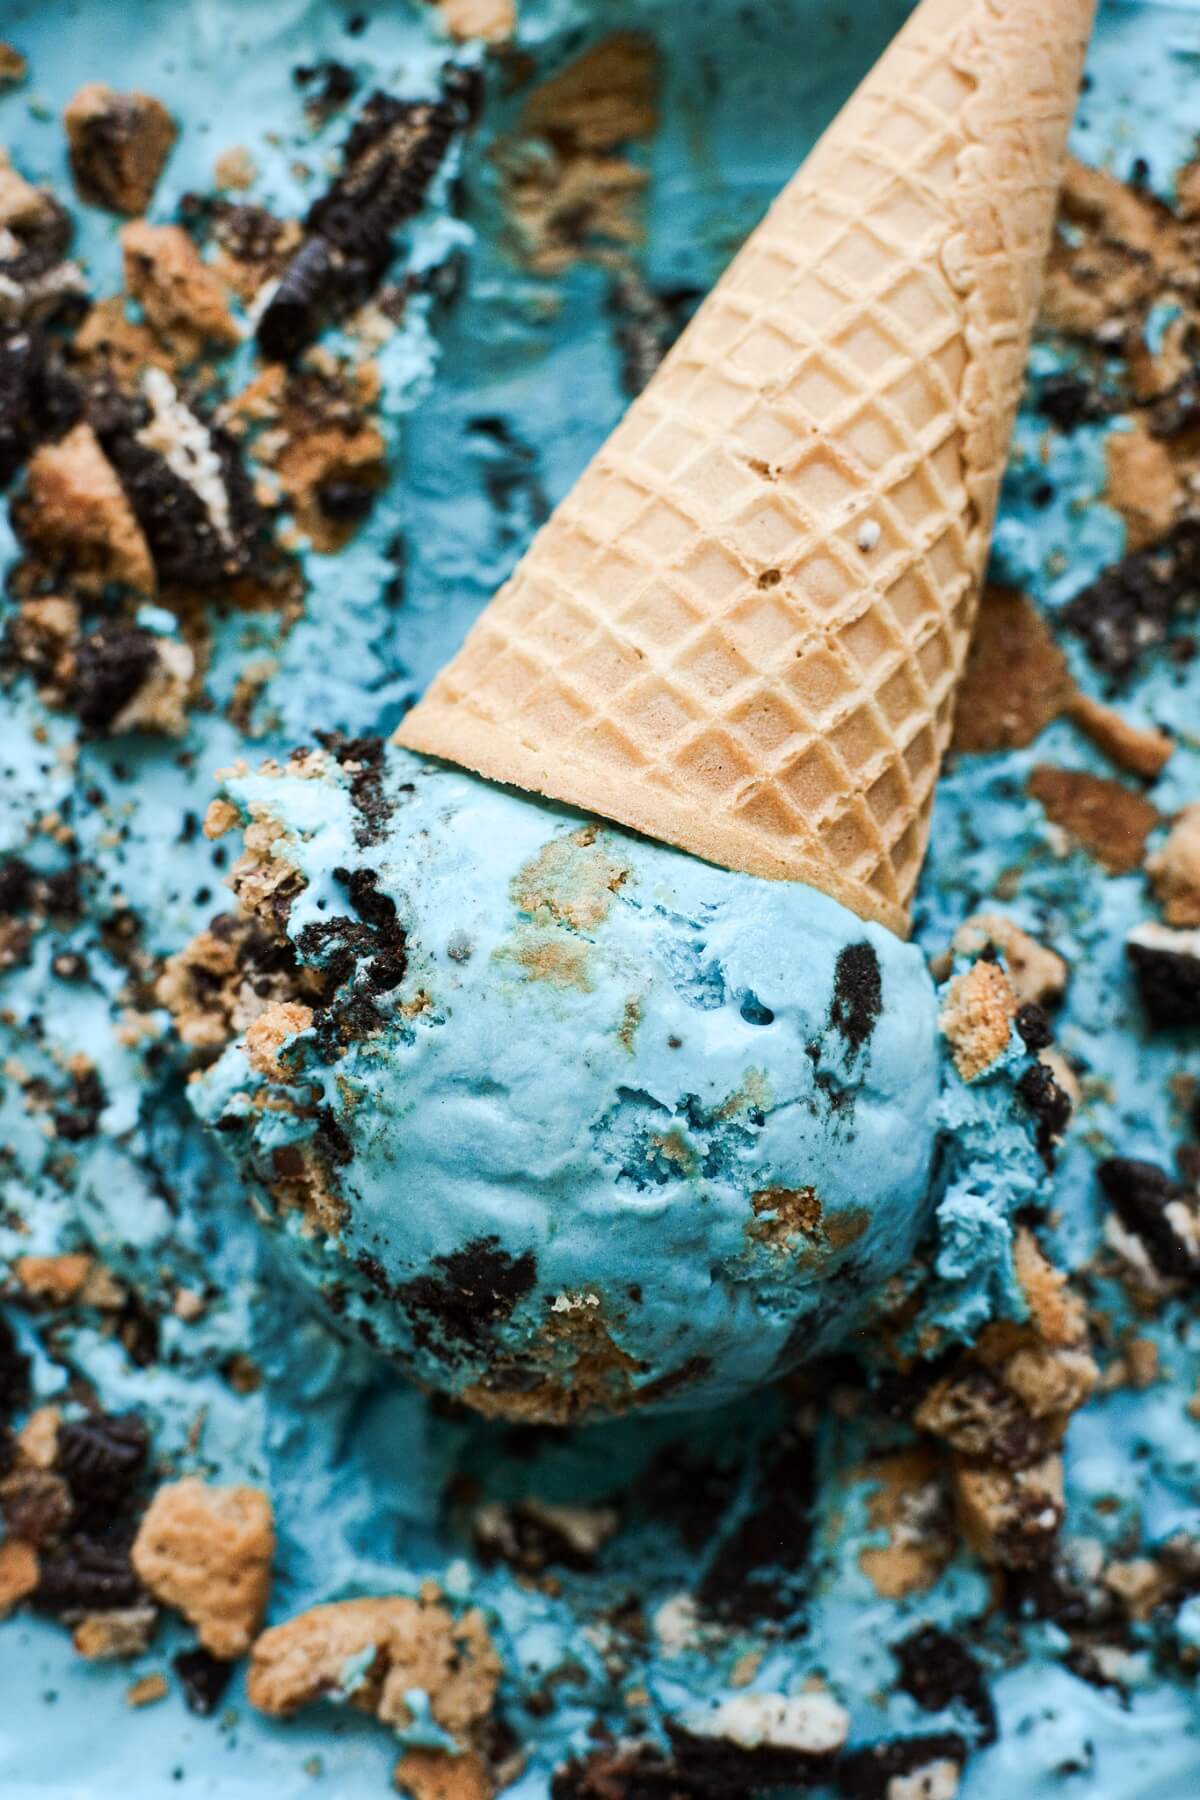 Cookie monster ice cream in an ice cream cone.